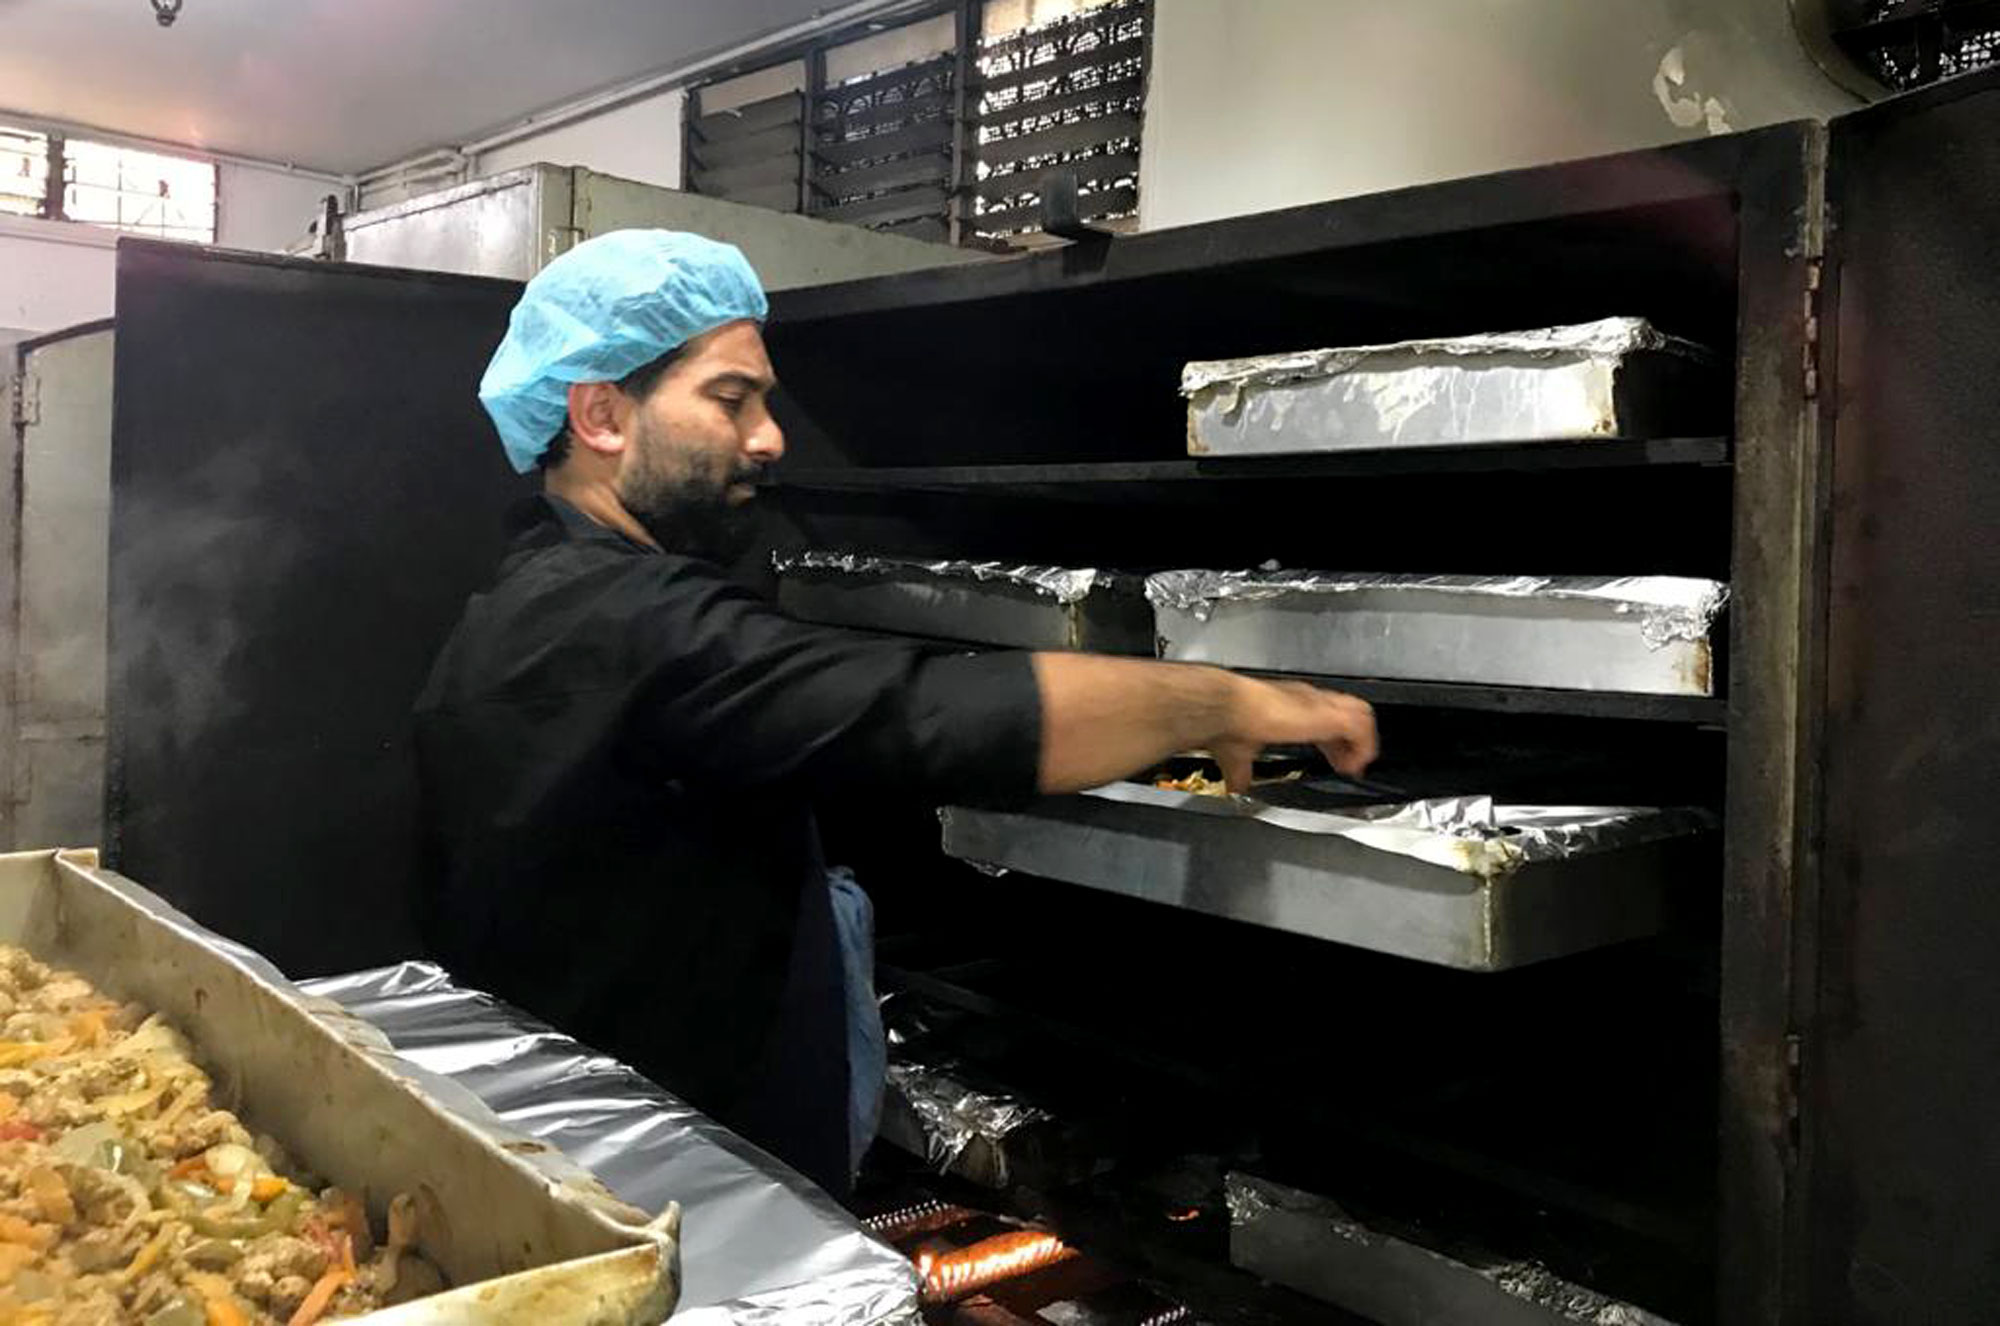 A man checks on food trays in a large restaurant oven.